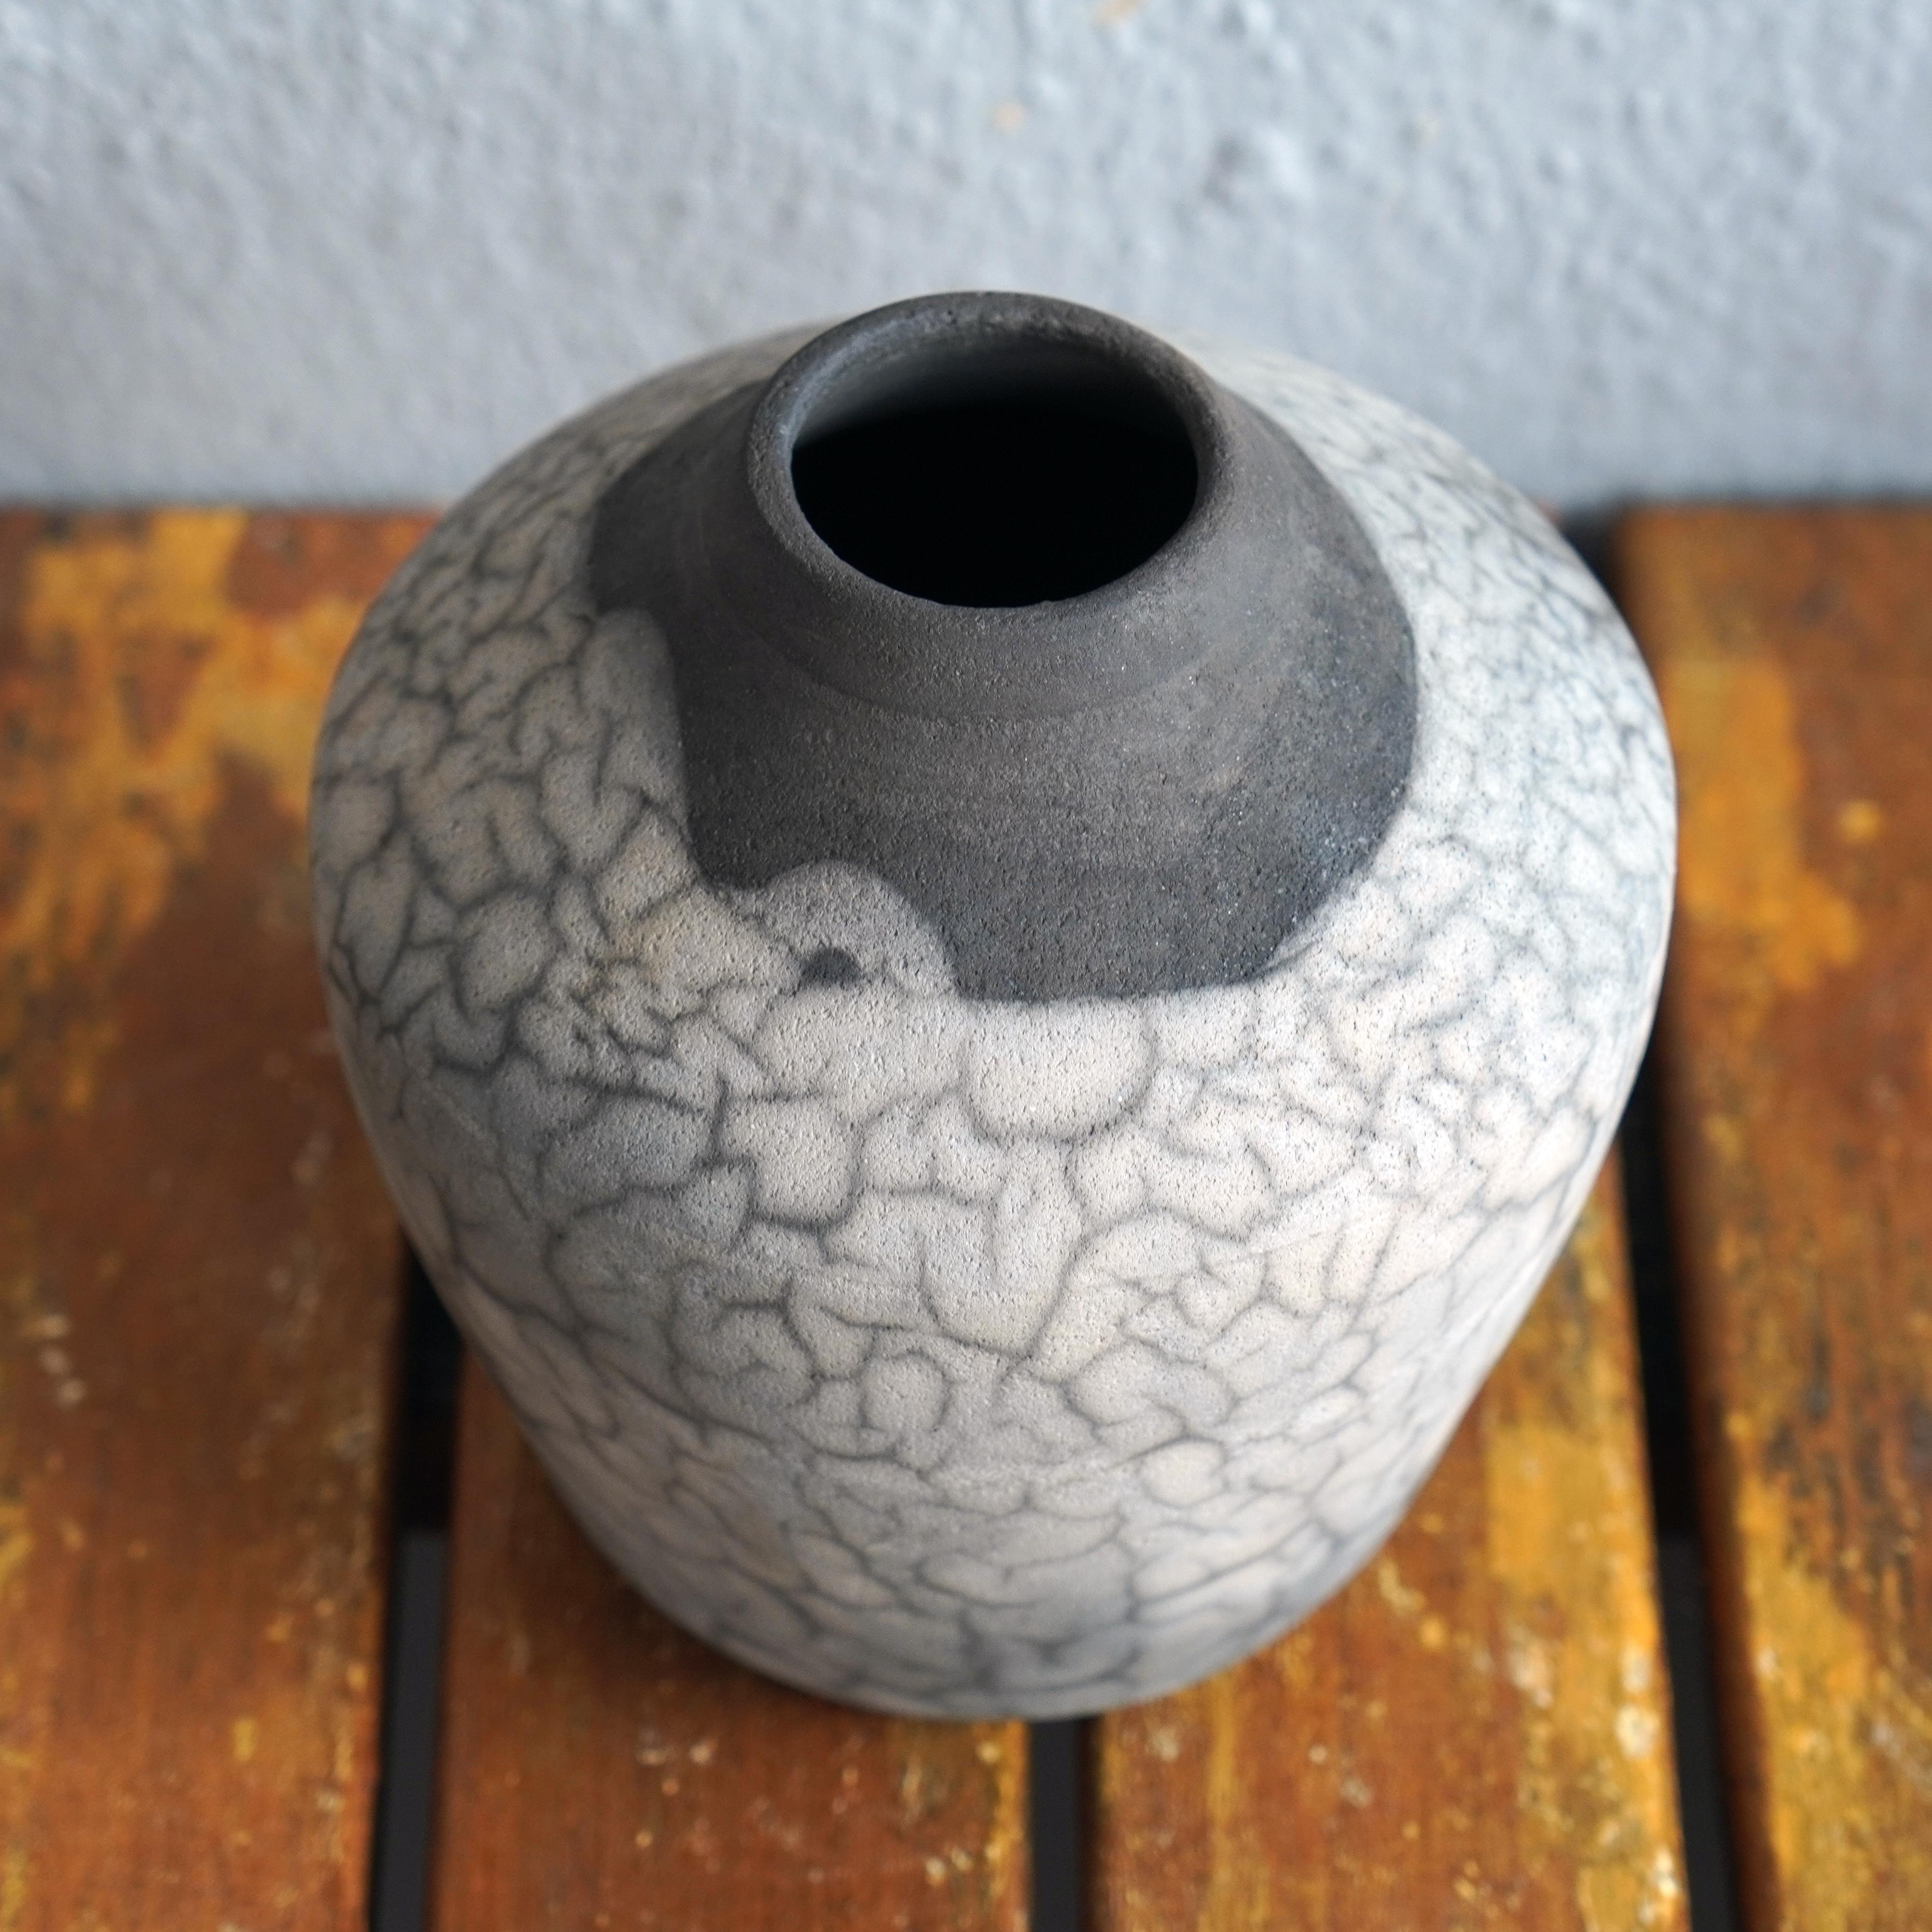 Inaka (田舎 ) ~ (n) countryside

Our Inaka Vase is urn-shaped with a narrow base, narrow mouth, and wider middle. True to its name, this vase evokes a feeling of countryside-living in the past, reminiscent of straw baskets or pots to store water